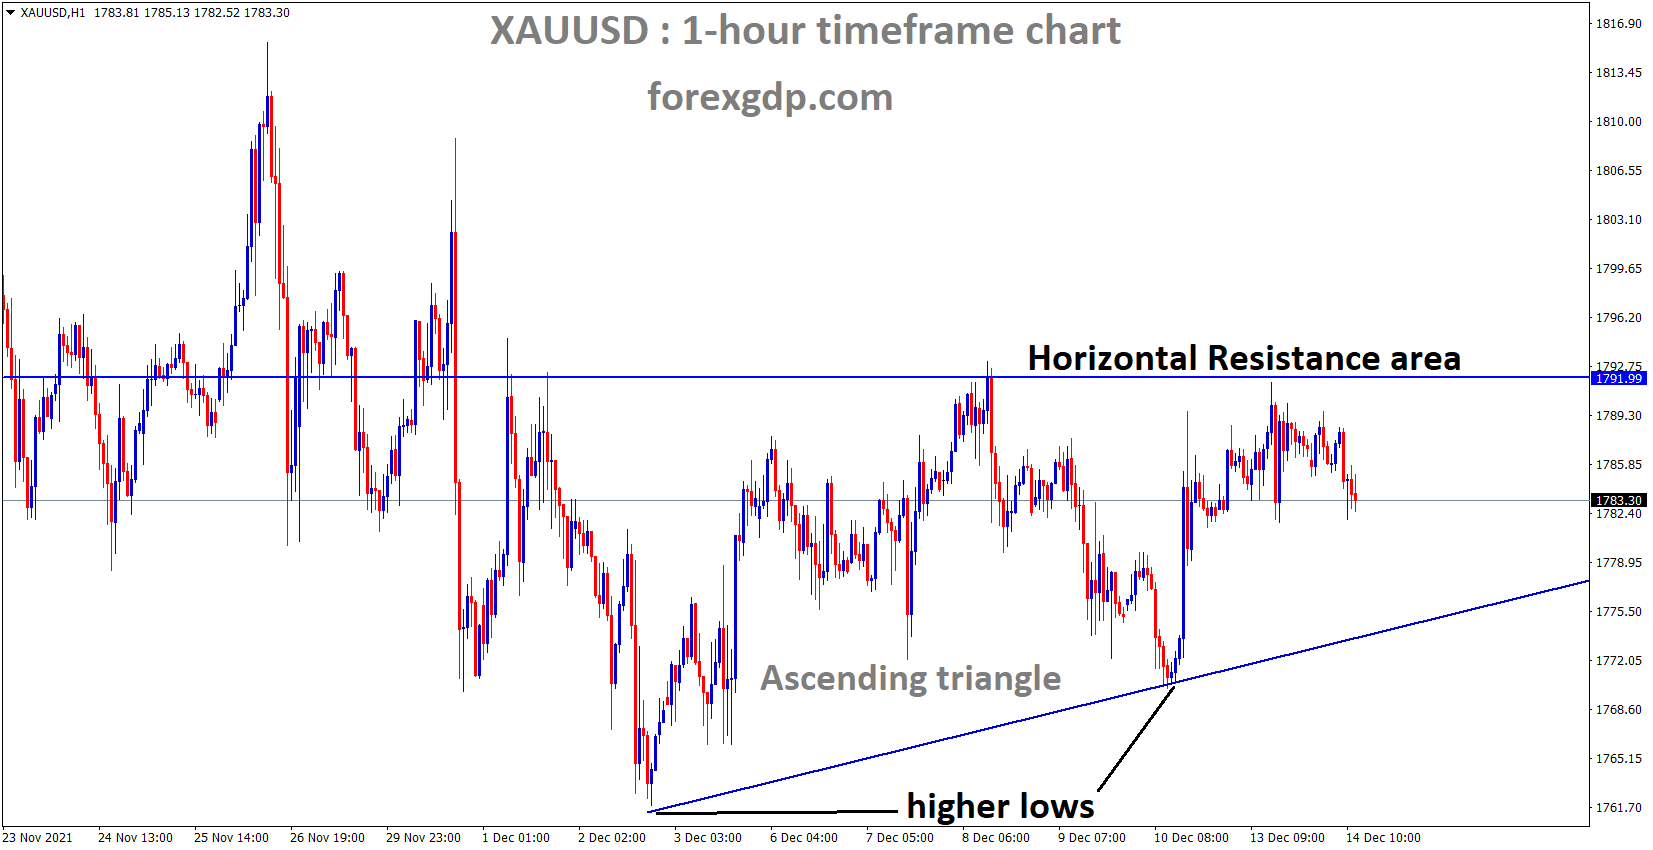 XAUUSD Gold price is moving in an ascending triangle pattern and the market fell from the horizontal resistance area.